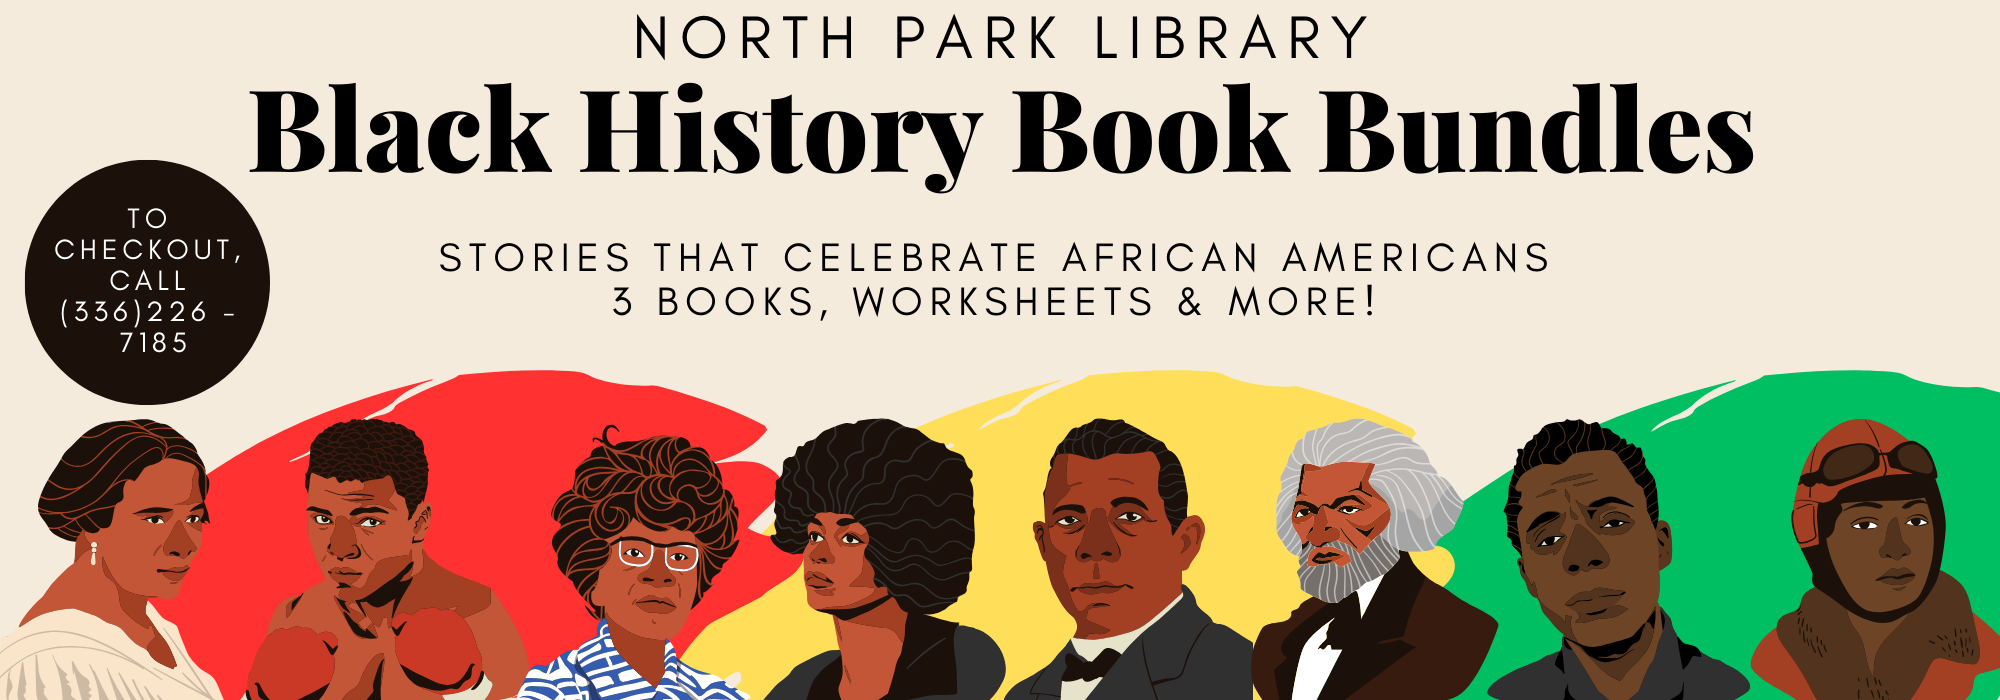 February BHM Book Bundles at North Park Library